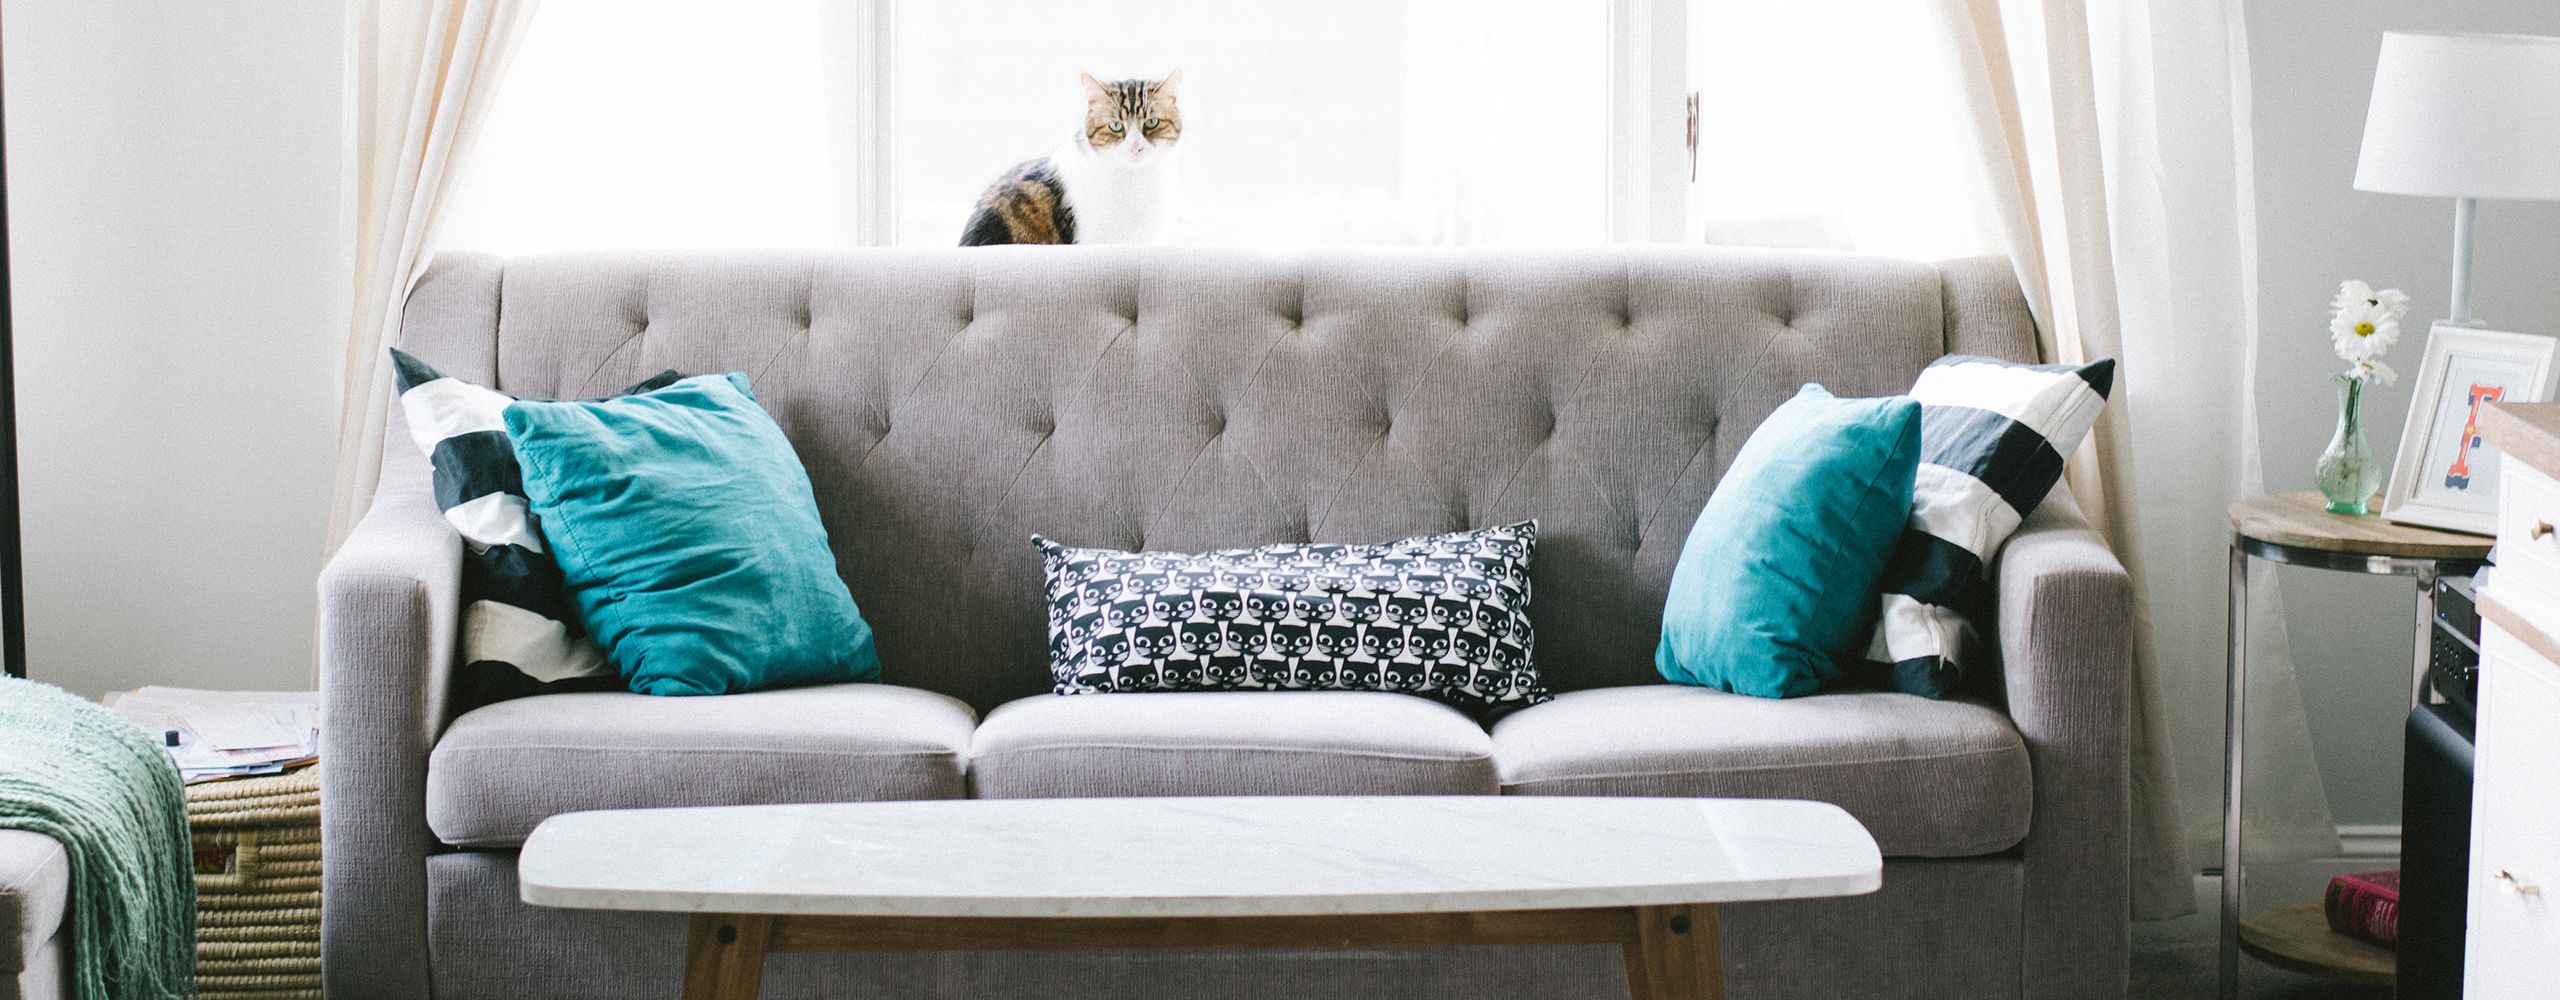 How To Be In The Top 10 With Best Home Decor Stores